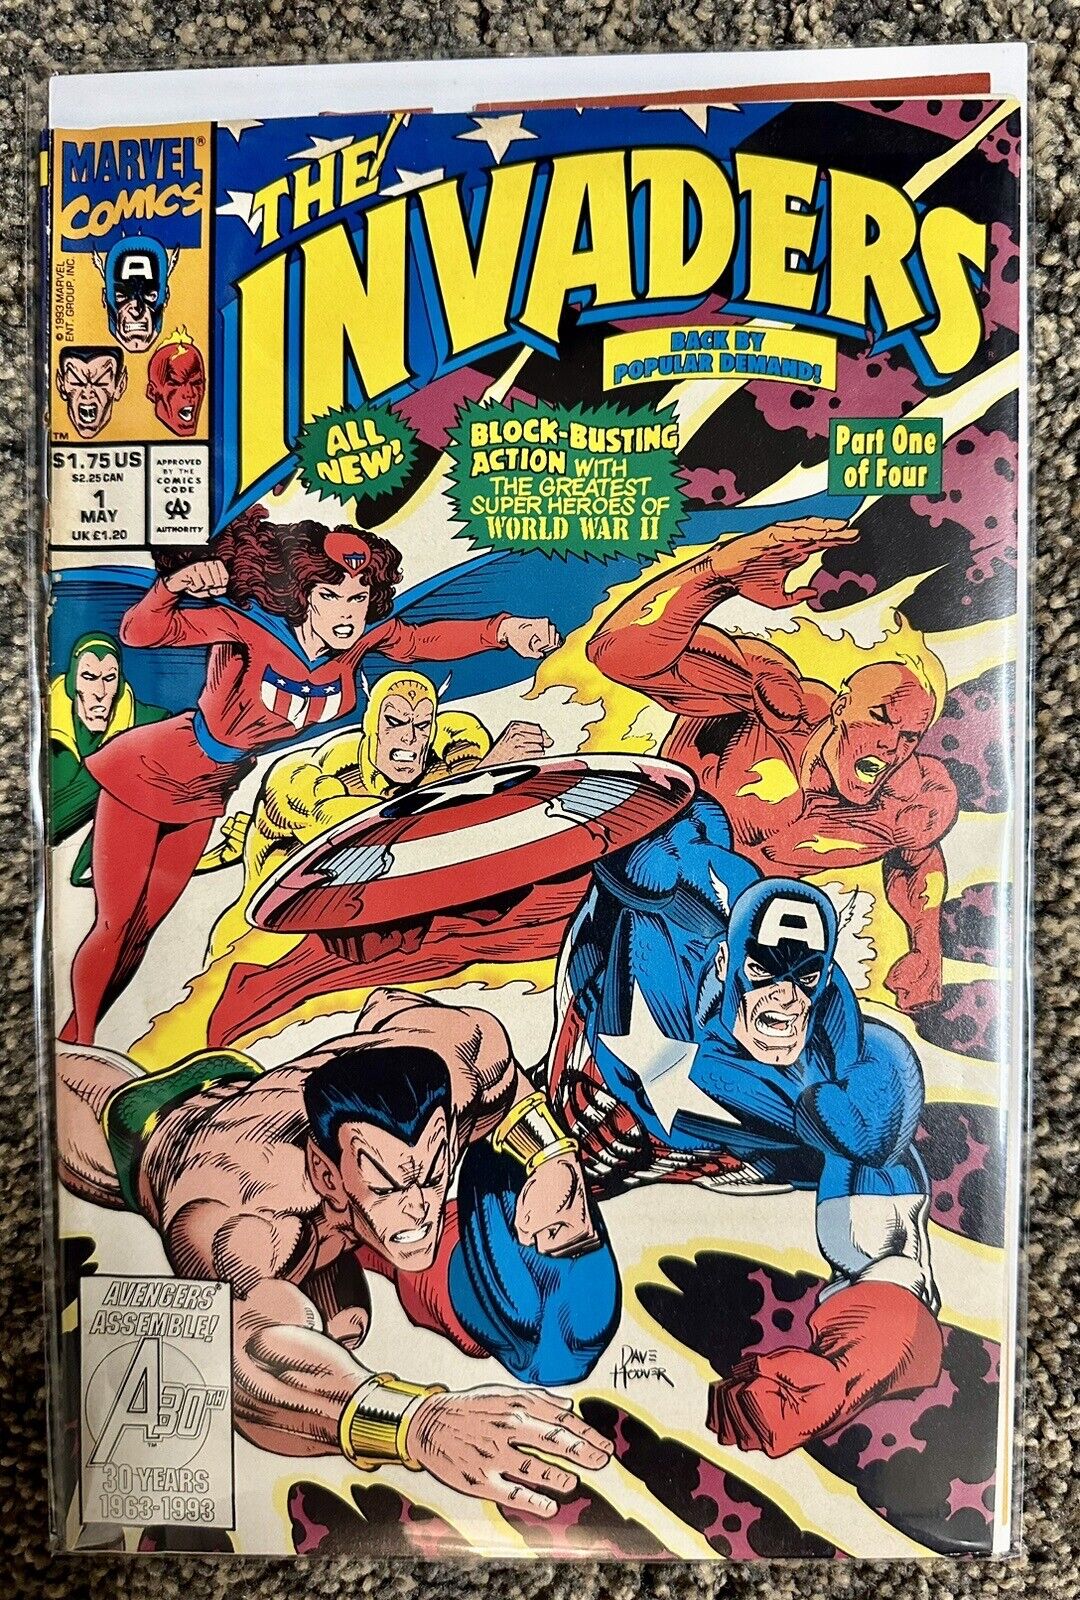 The Invaders #1 - Marvel - Dave Hoover